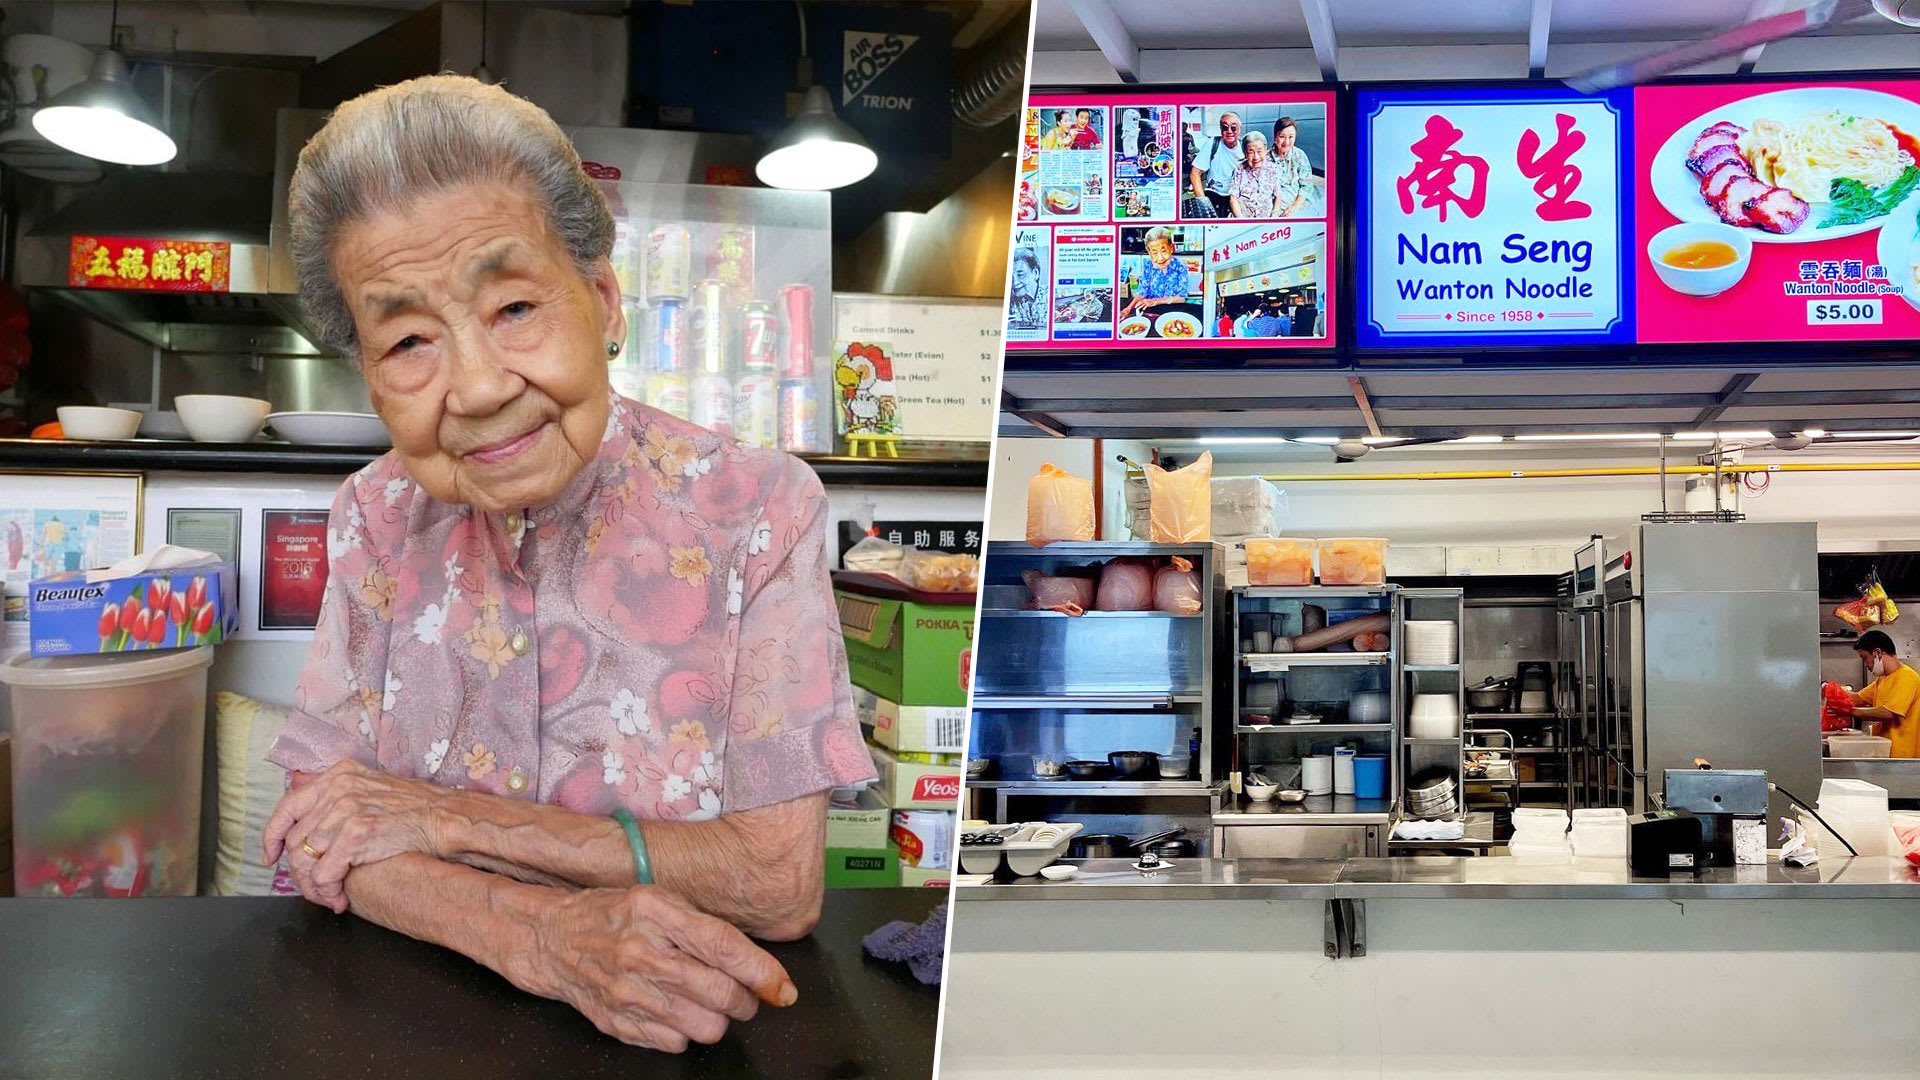 92-Year-Old Nam Seng Wanton Noodle Hawker Reopens Stall In New Location After Hiatus